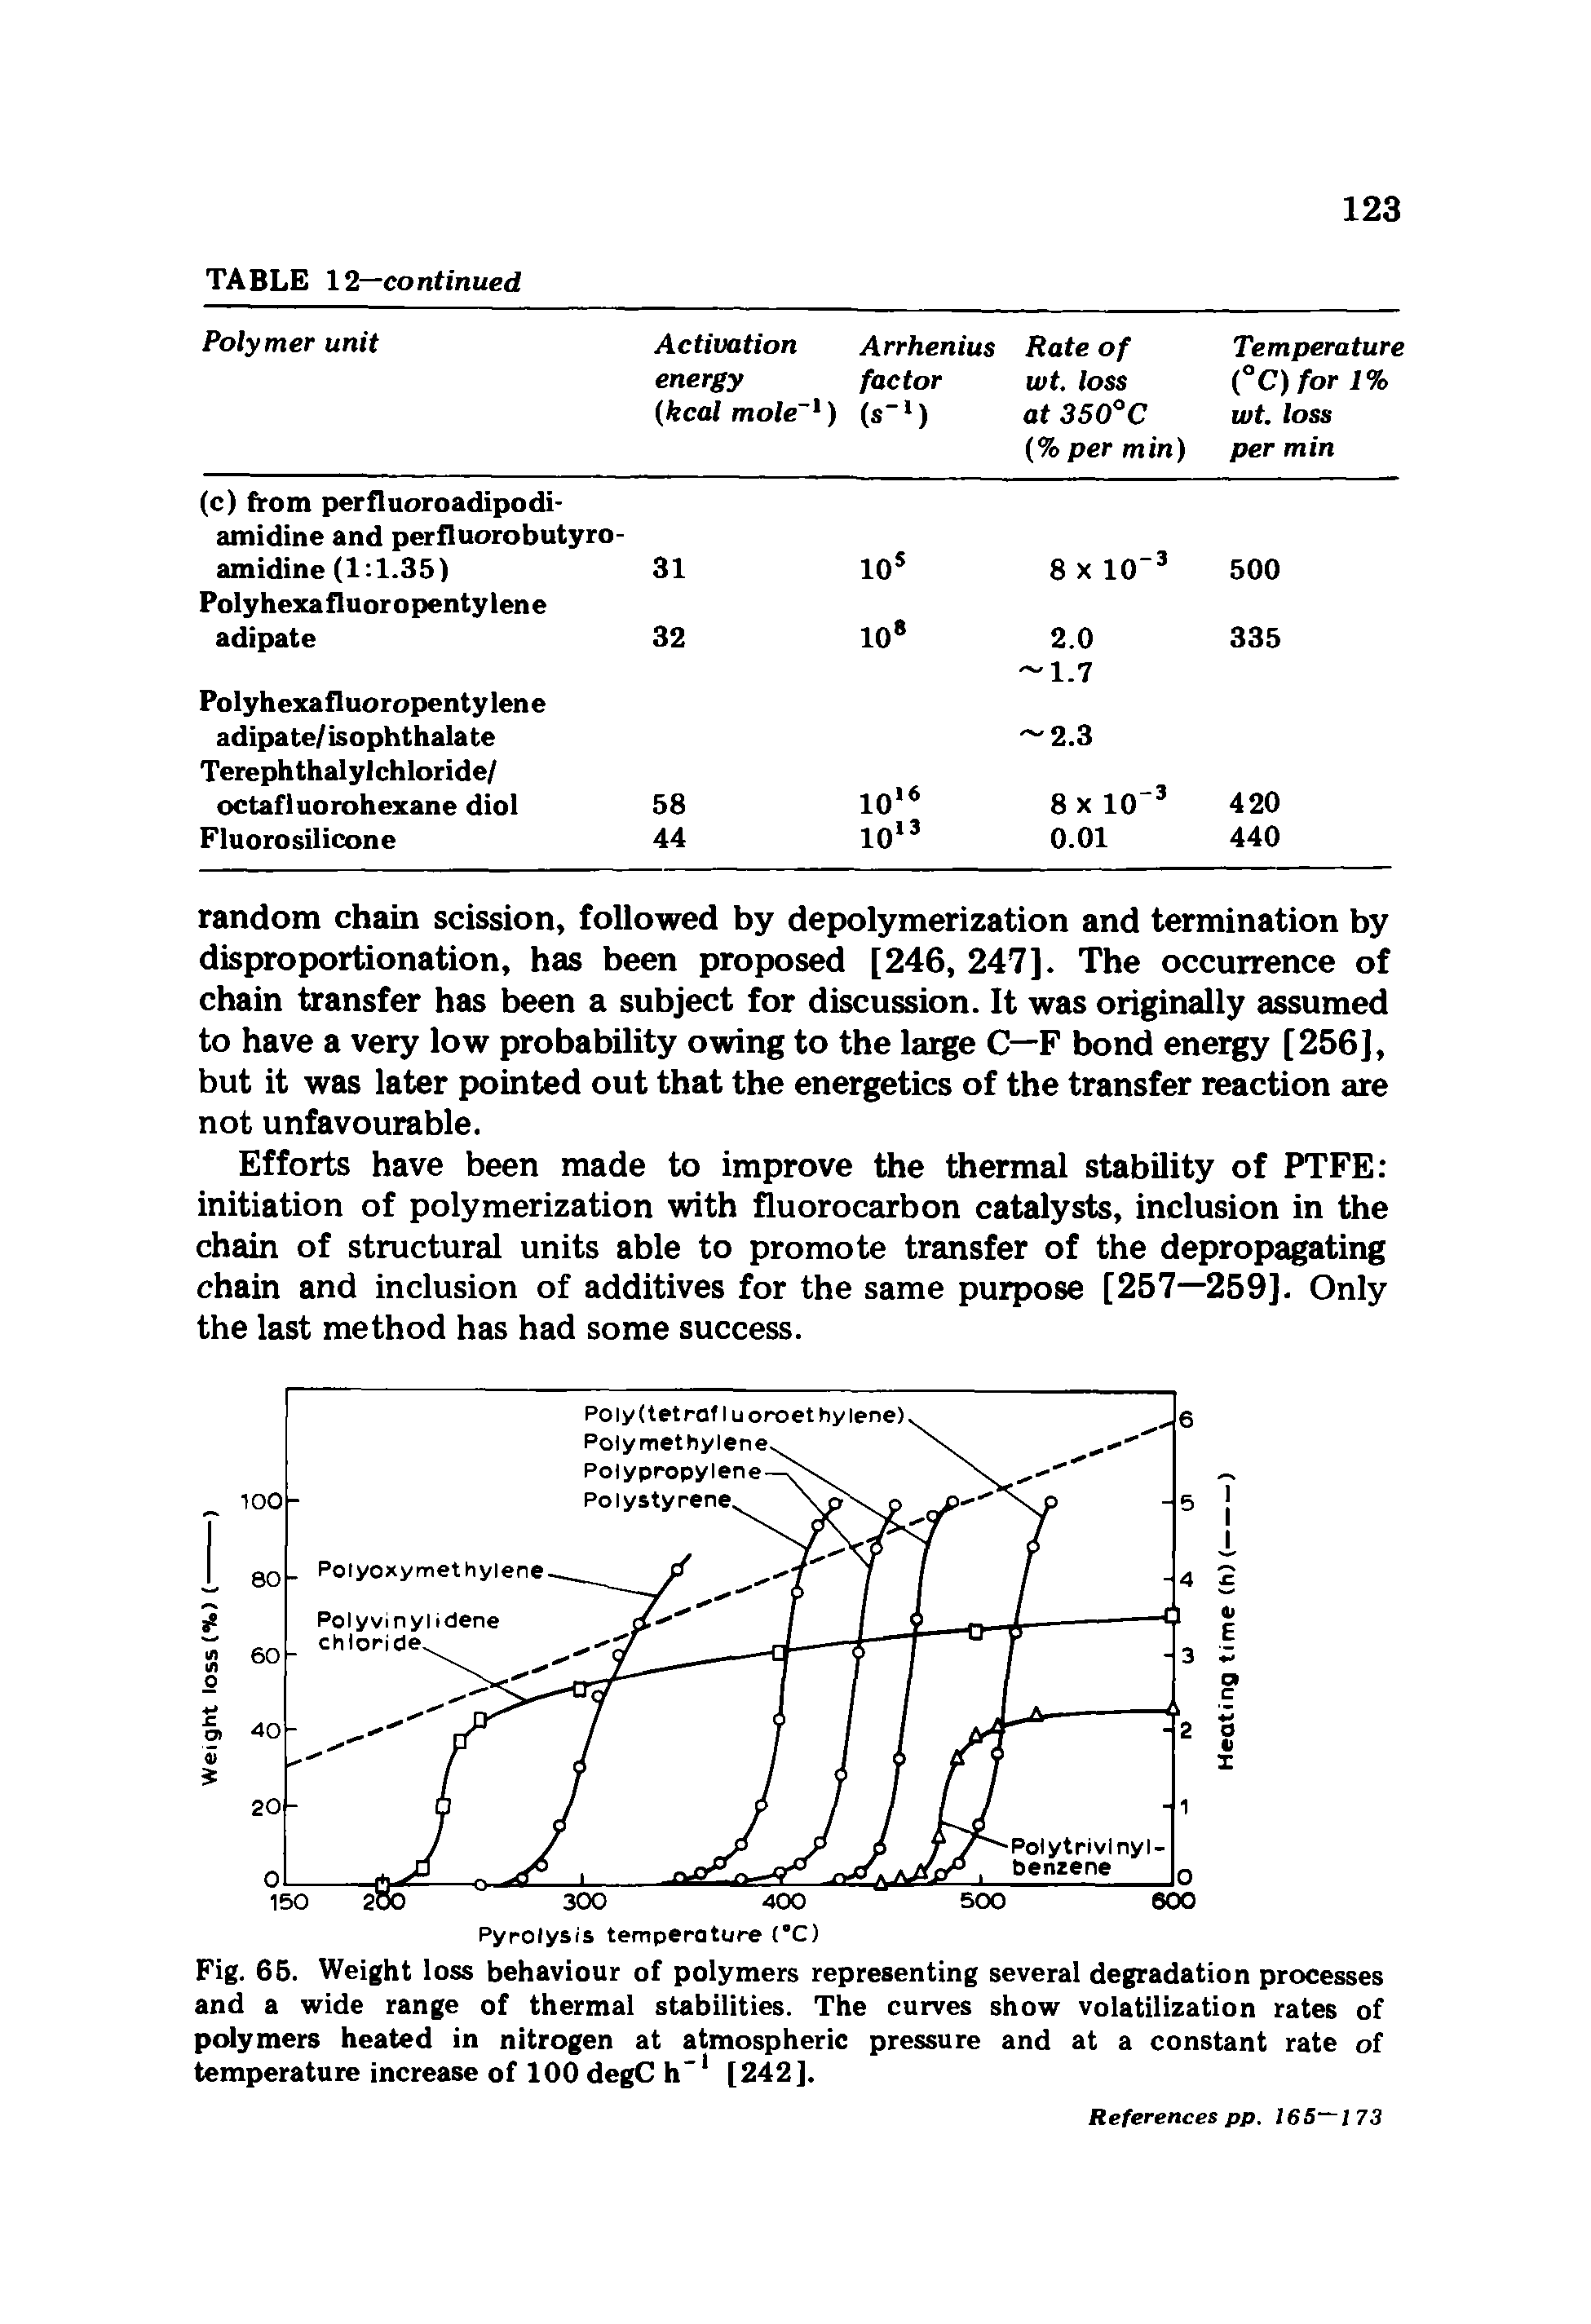 Fig. 65. Weight loss behaviour of polymers representing several degradation processes and a wide range of thermal stabilities. The curves show volatilization rates of polymers heated in nitrogen at atmospheric pressure and at a constant rate of temperature increase of 100 degC h 1 [242].